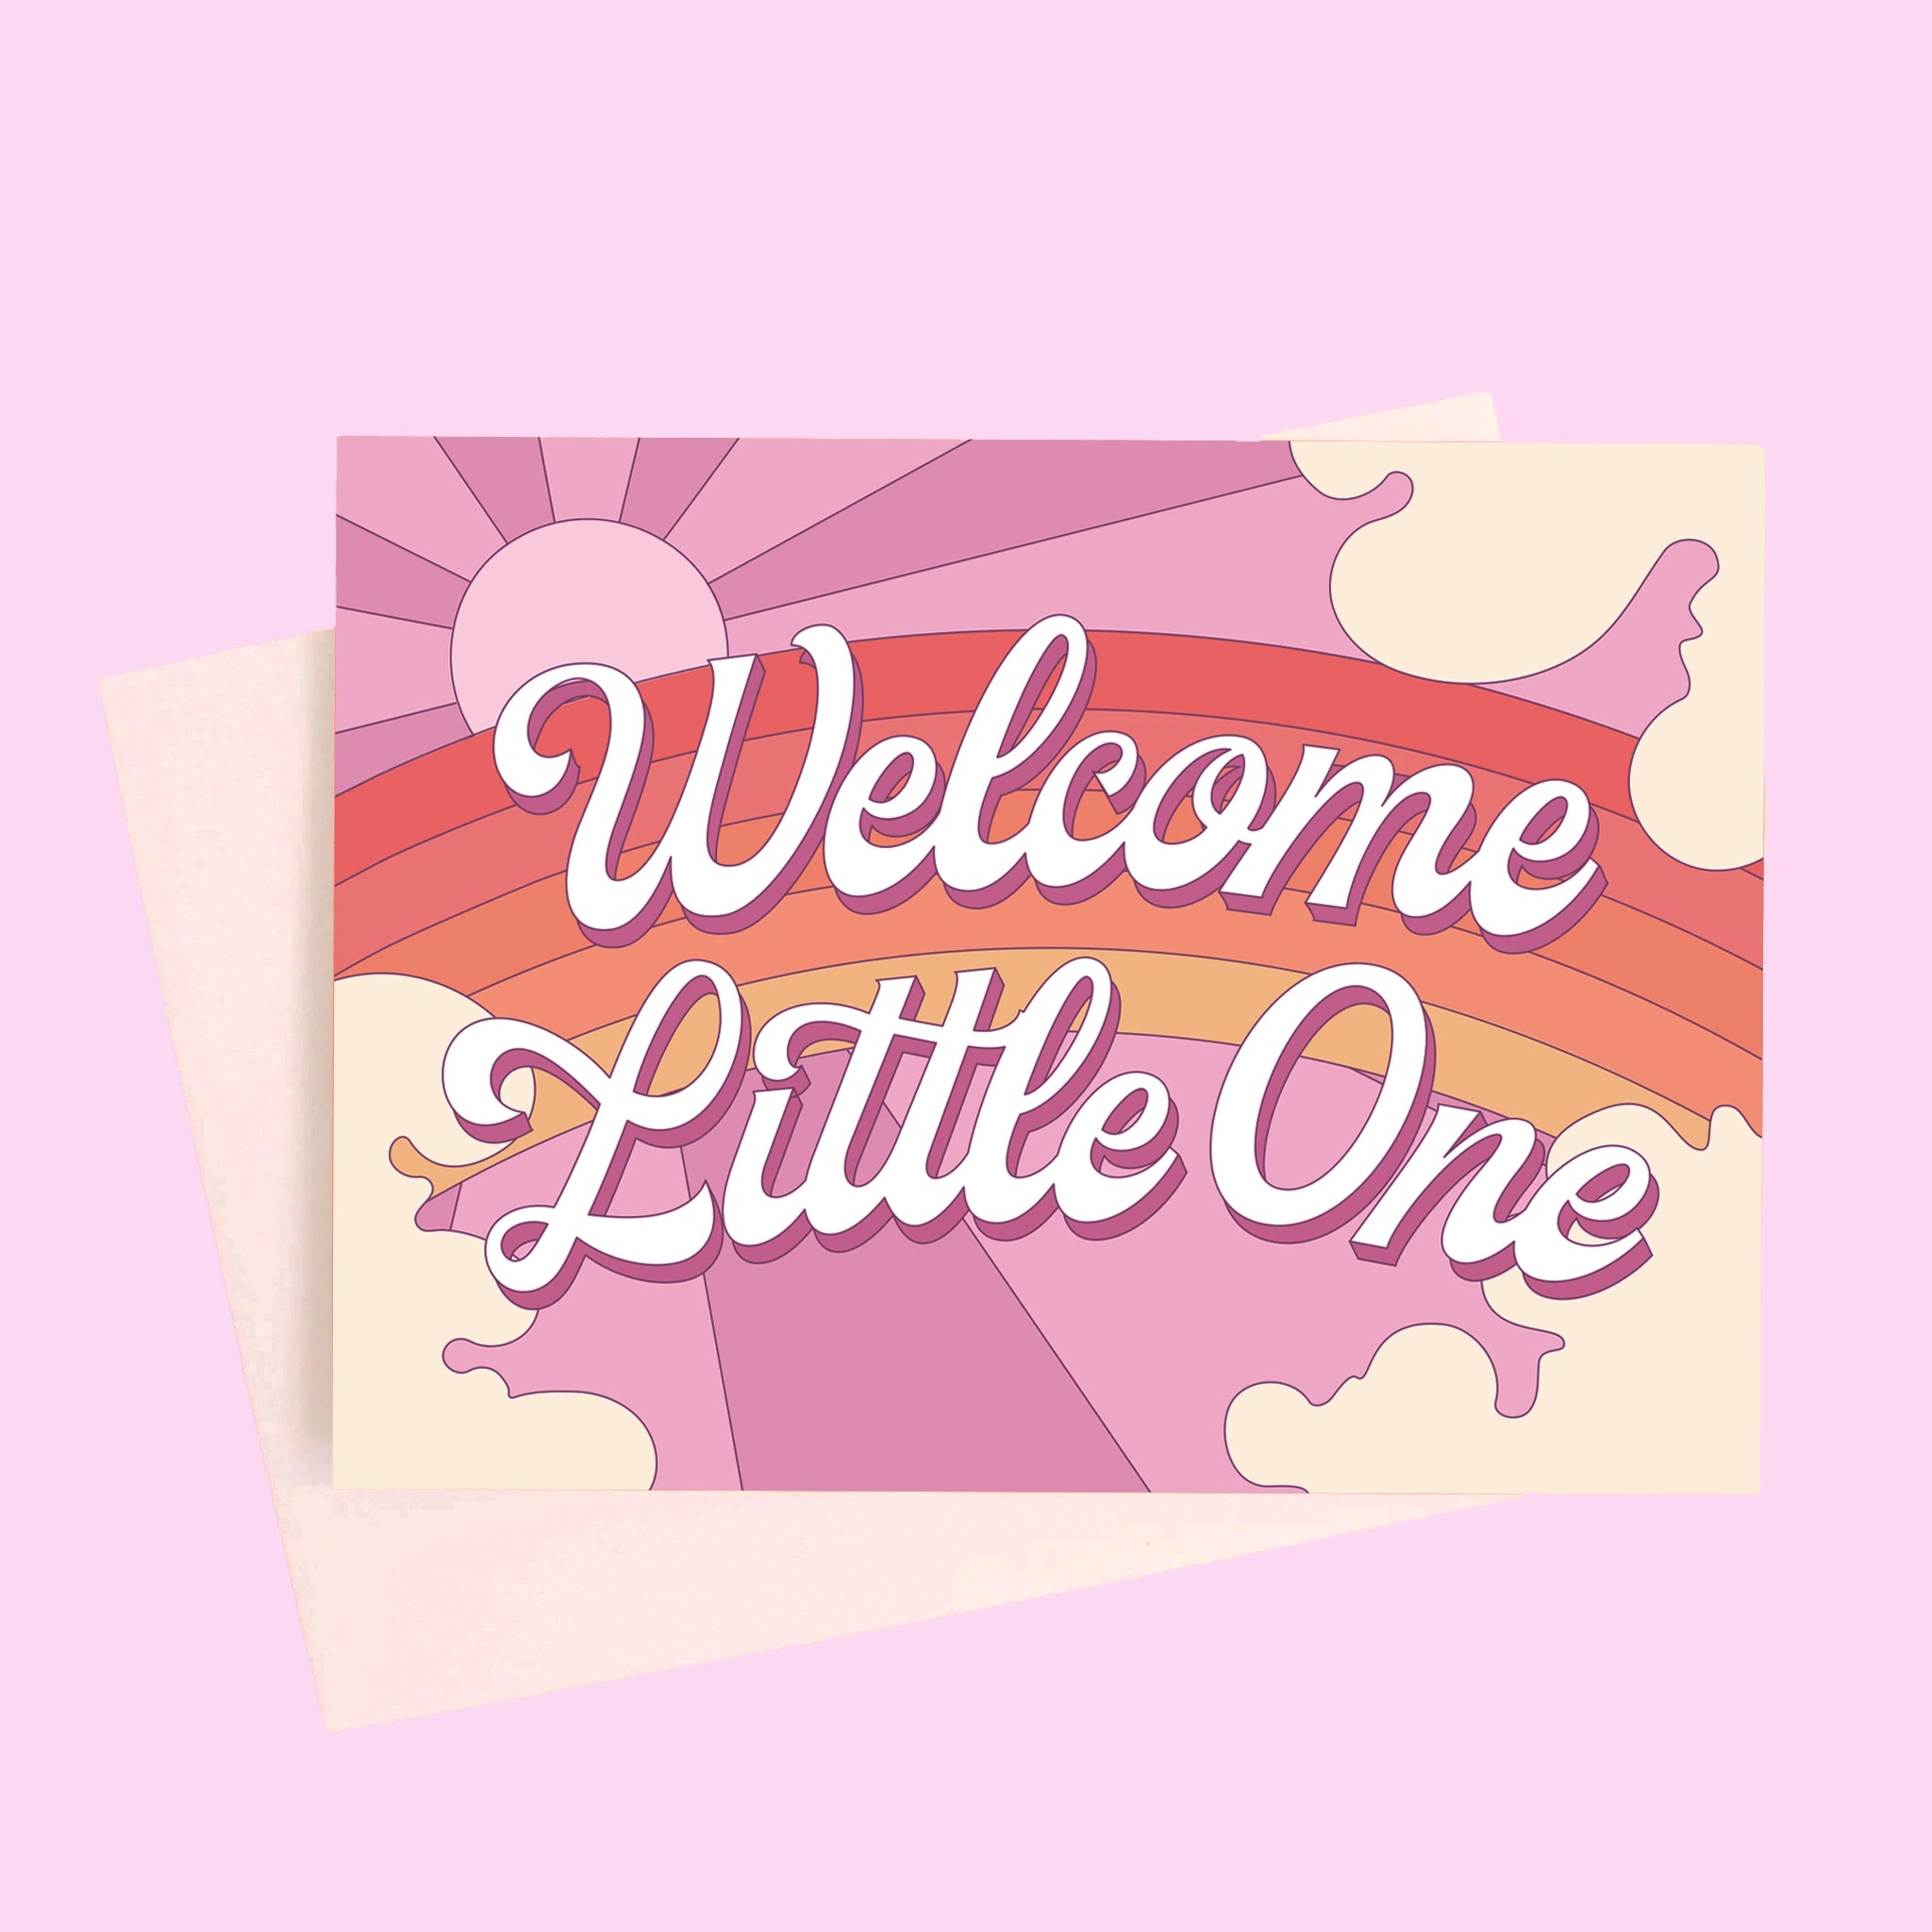 On a light purple background is a greeting card featuring a rainbow and sun graphic and white text in the center that reads, "Welcome Little One".